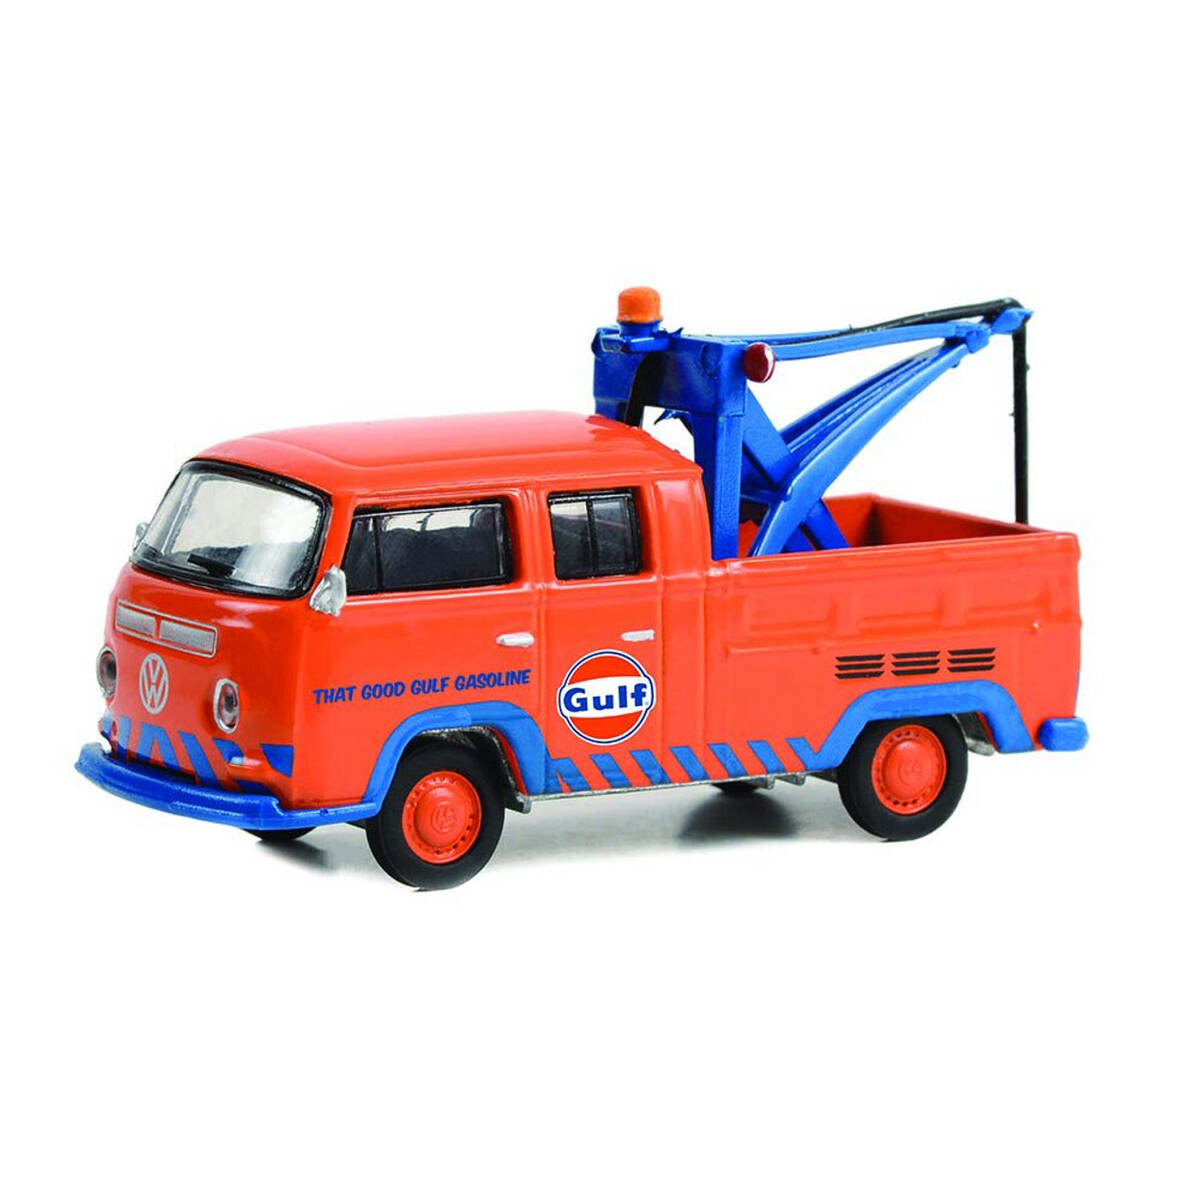 Greenlight 1/64 1970 Volkswagen Double Cab Pickup With Drop in Tow Hook - Gulf Oil 'That Good Gulf Gasoline' 30412